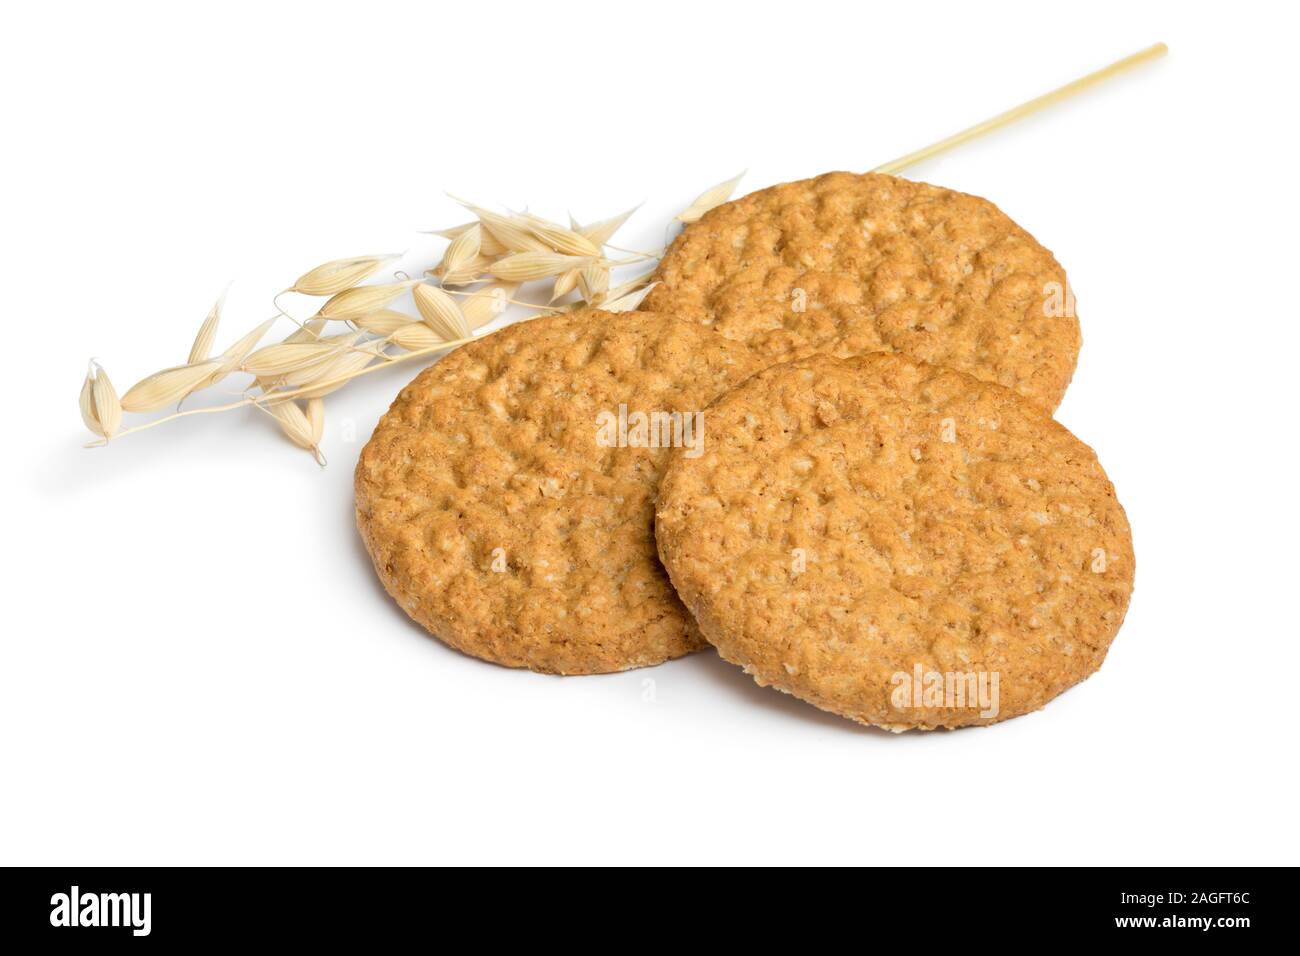 Crunchy healthy oat cookies and an ear of dried oat isolated on white background Stock Photo